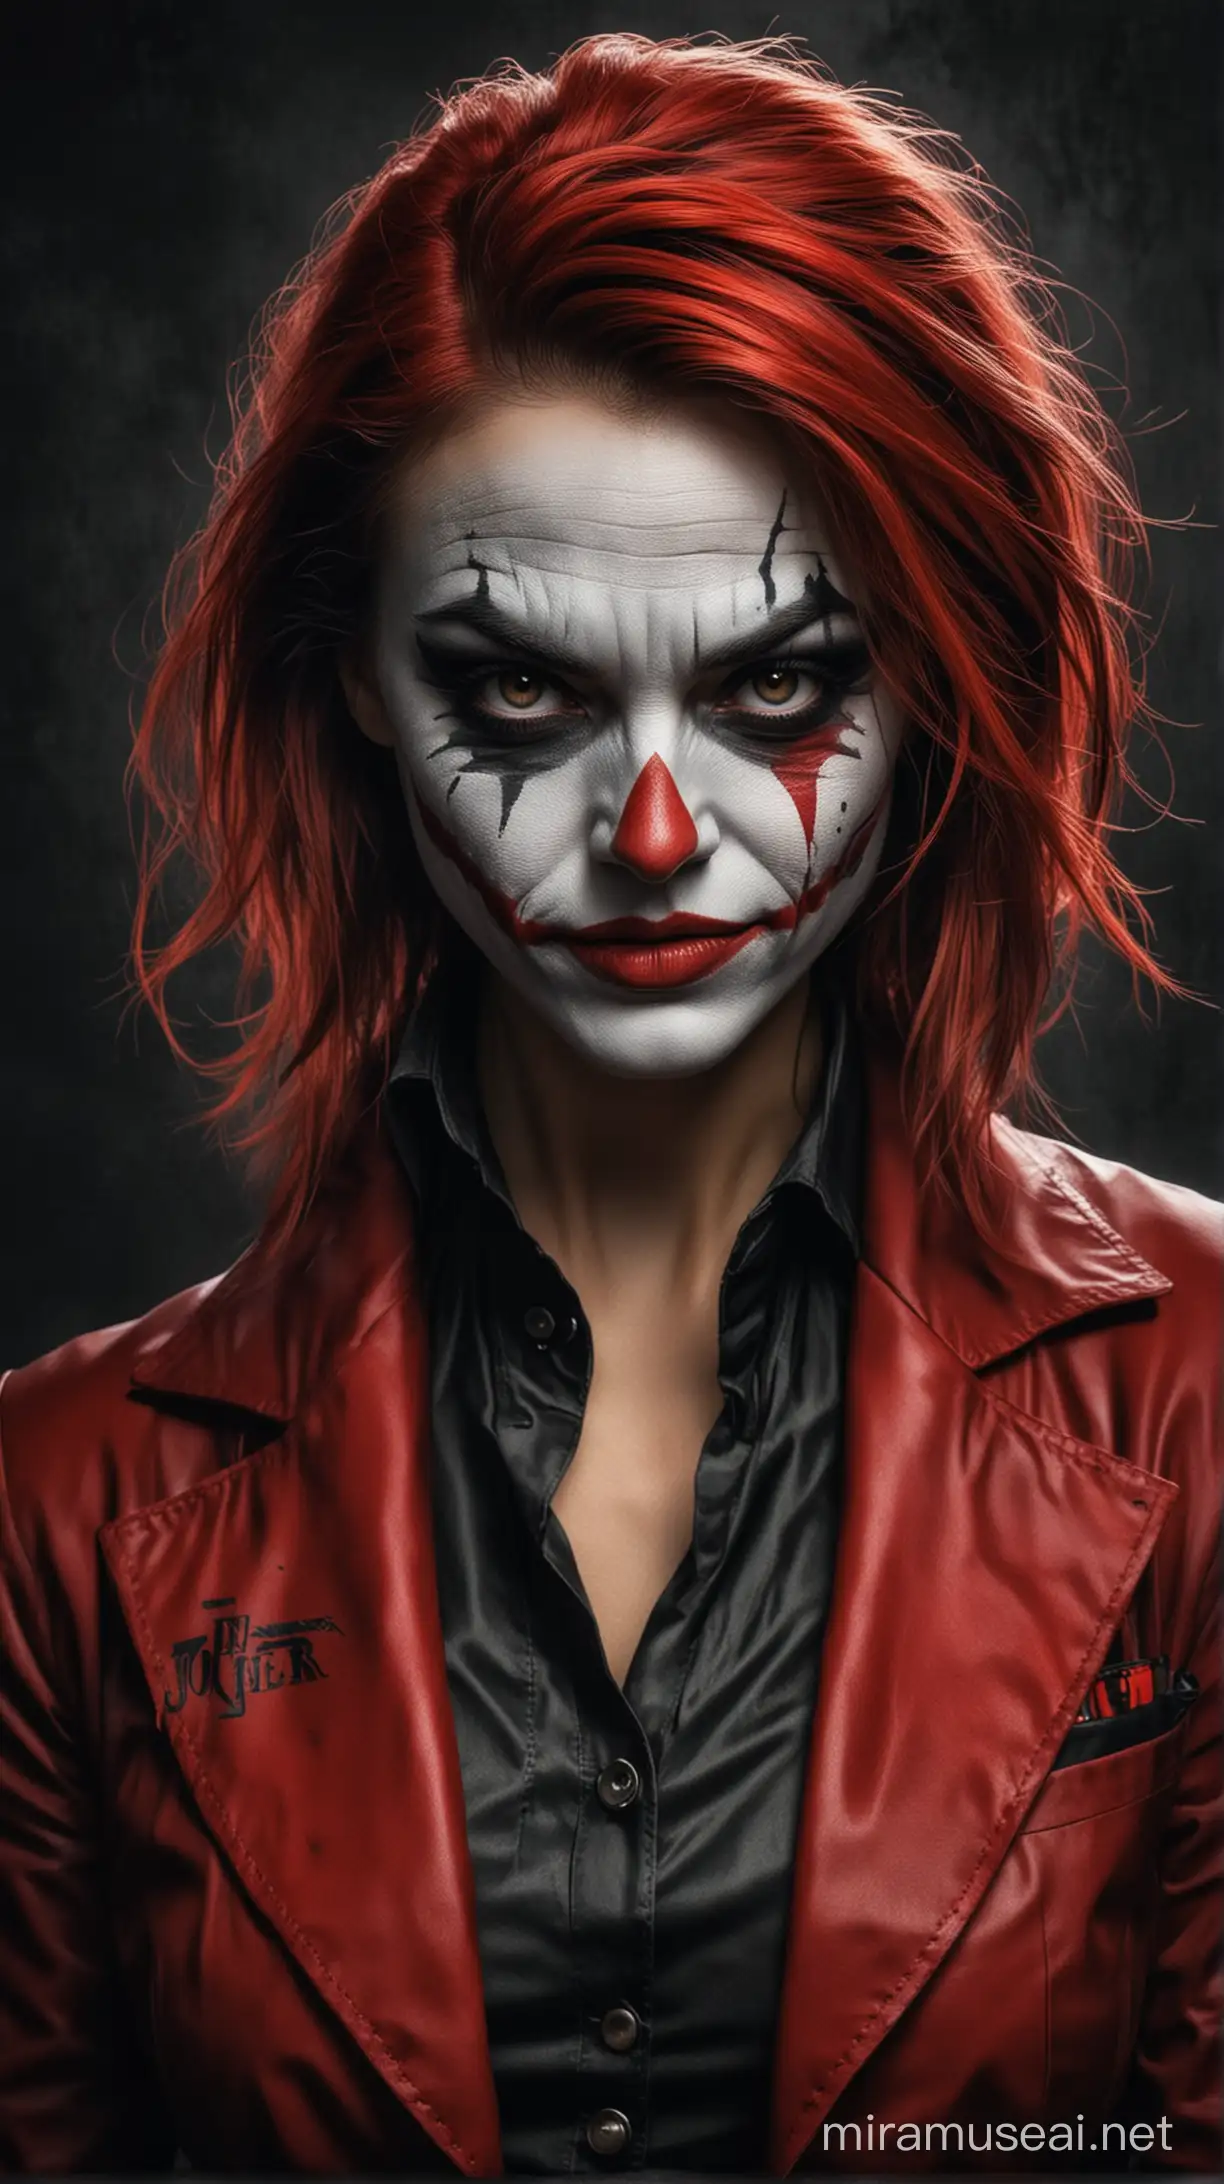 Create  A doctor of graphic desgin "female", make her face like "THE JOker" .. Use the colors "red,black"